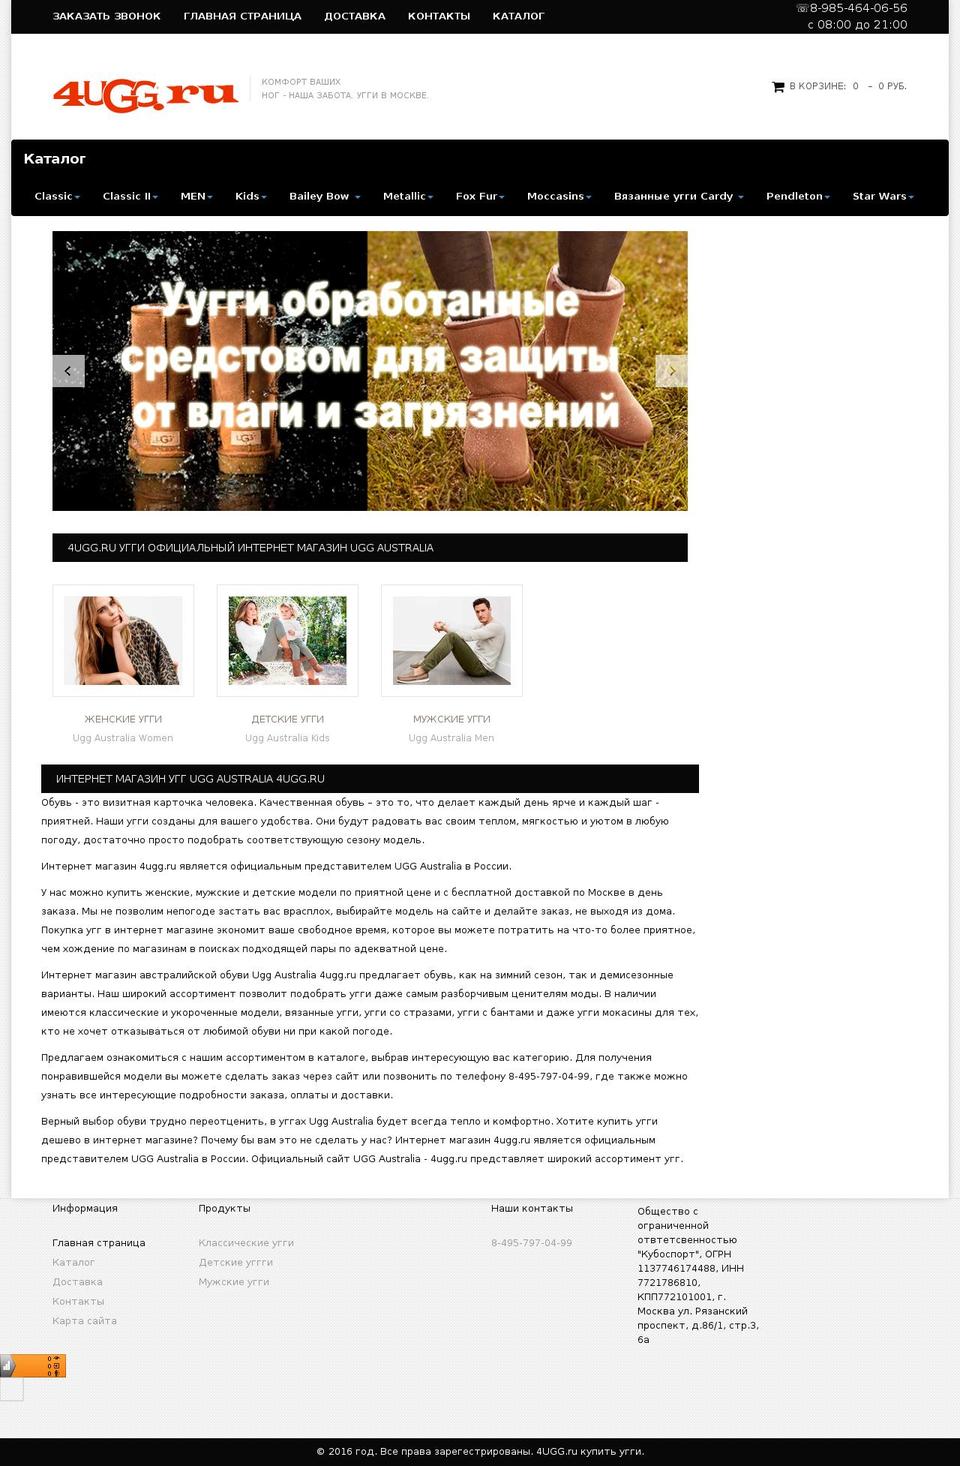 tm-shopify054-gifts Shopify theme site example 4ugg.ru